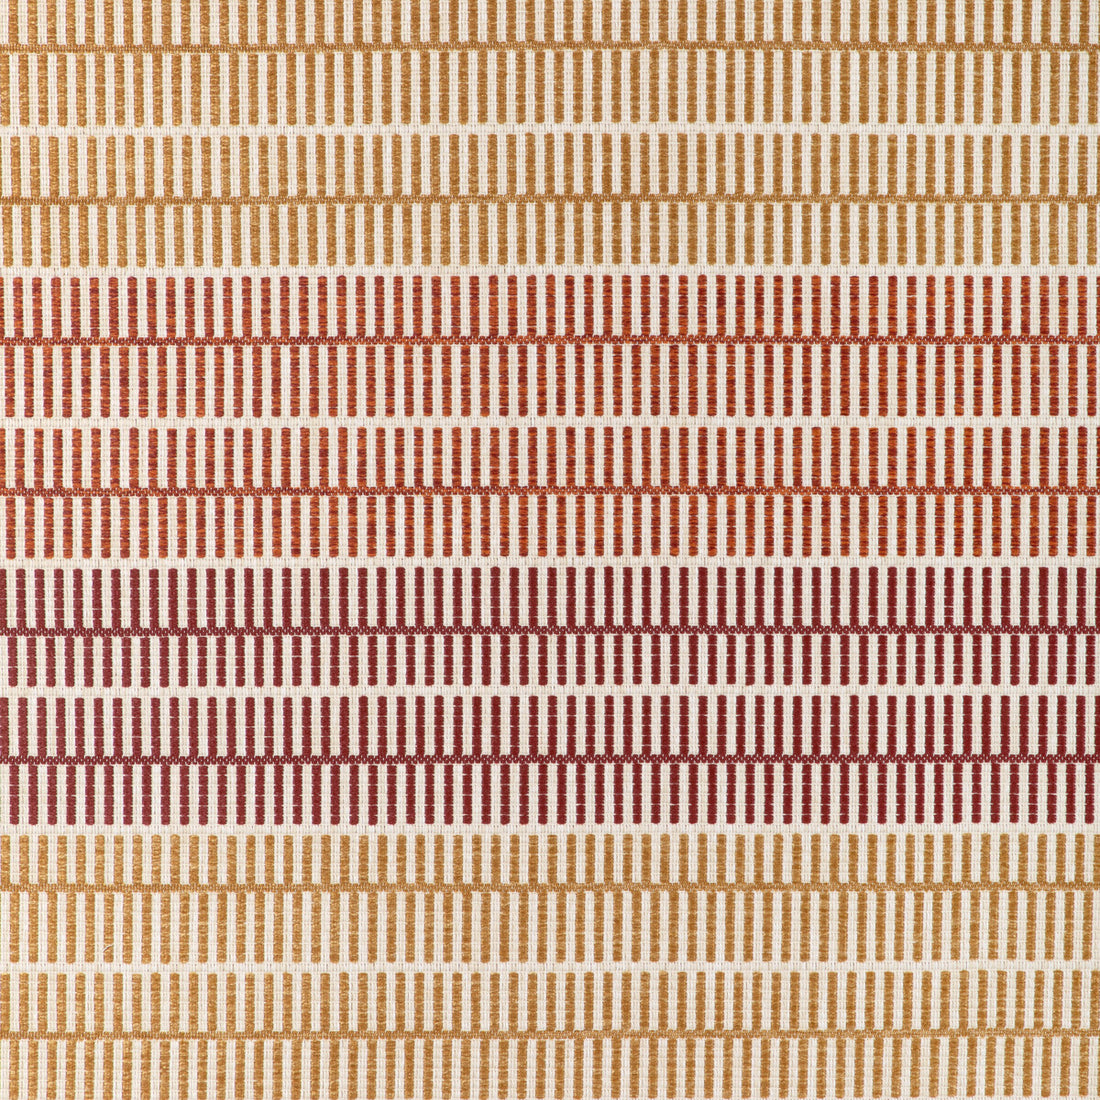 Les Oliviers Weave fabric in spice color - pattern 8024117.924.0 - by Brunschwig &amp; Fils in the Les Ensembliers L&